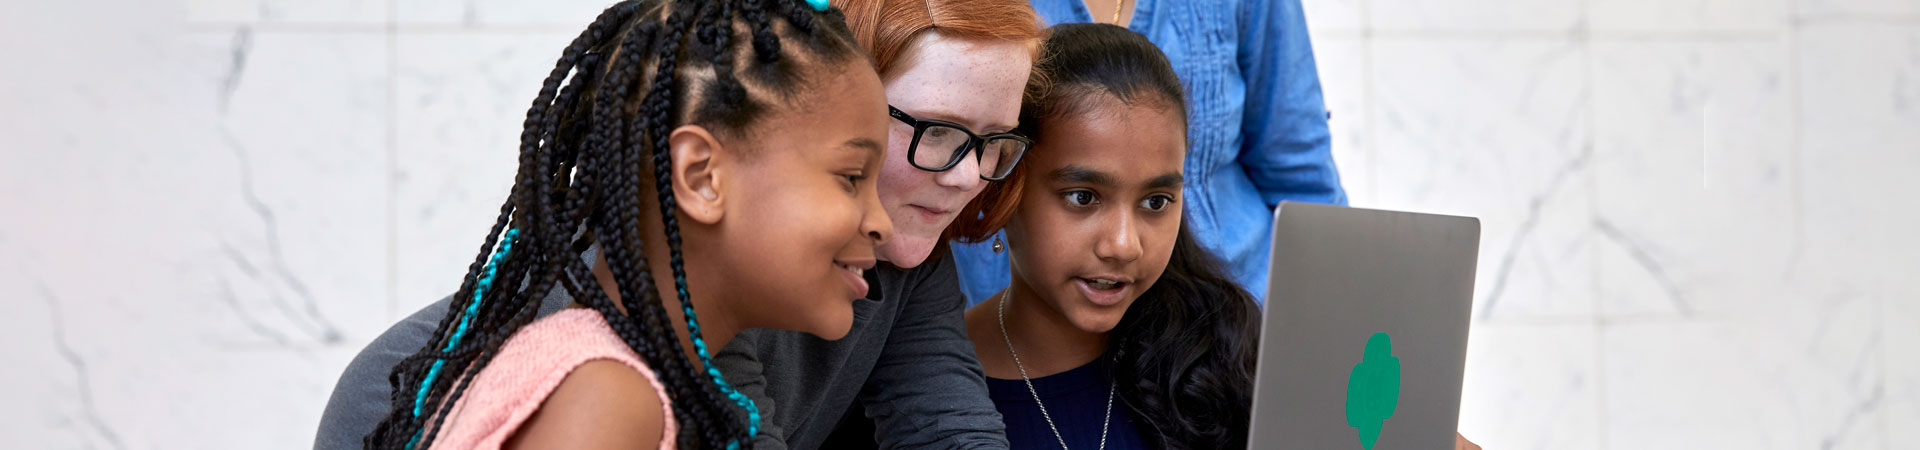  Three Girl Scouts looking at the screen of a silver laptop with a green trefoil.  